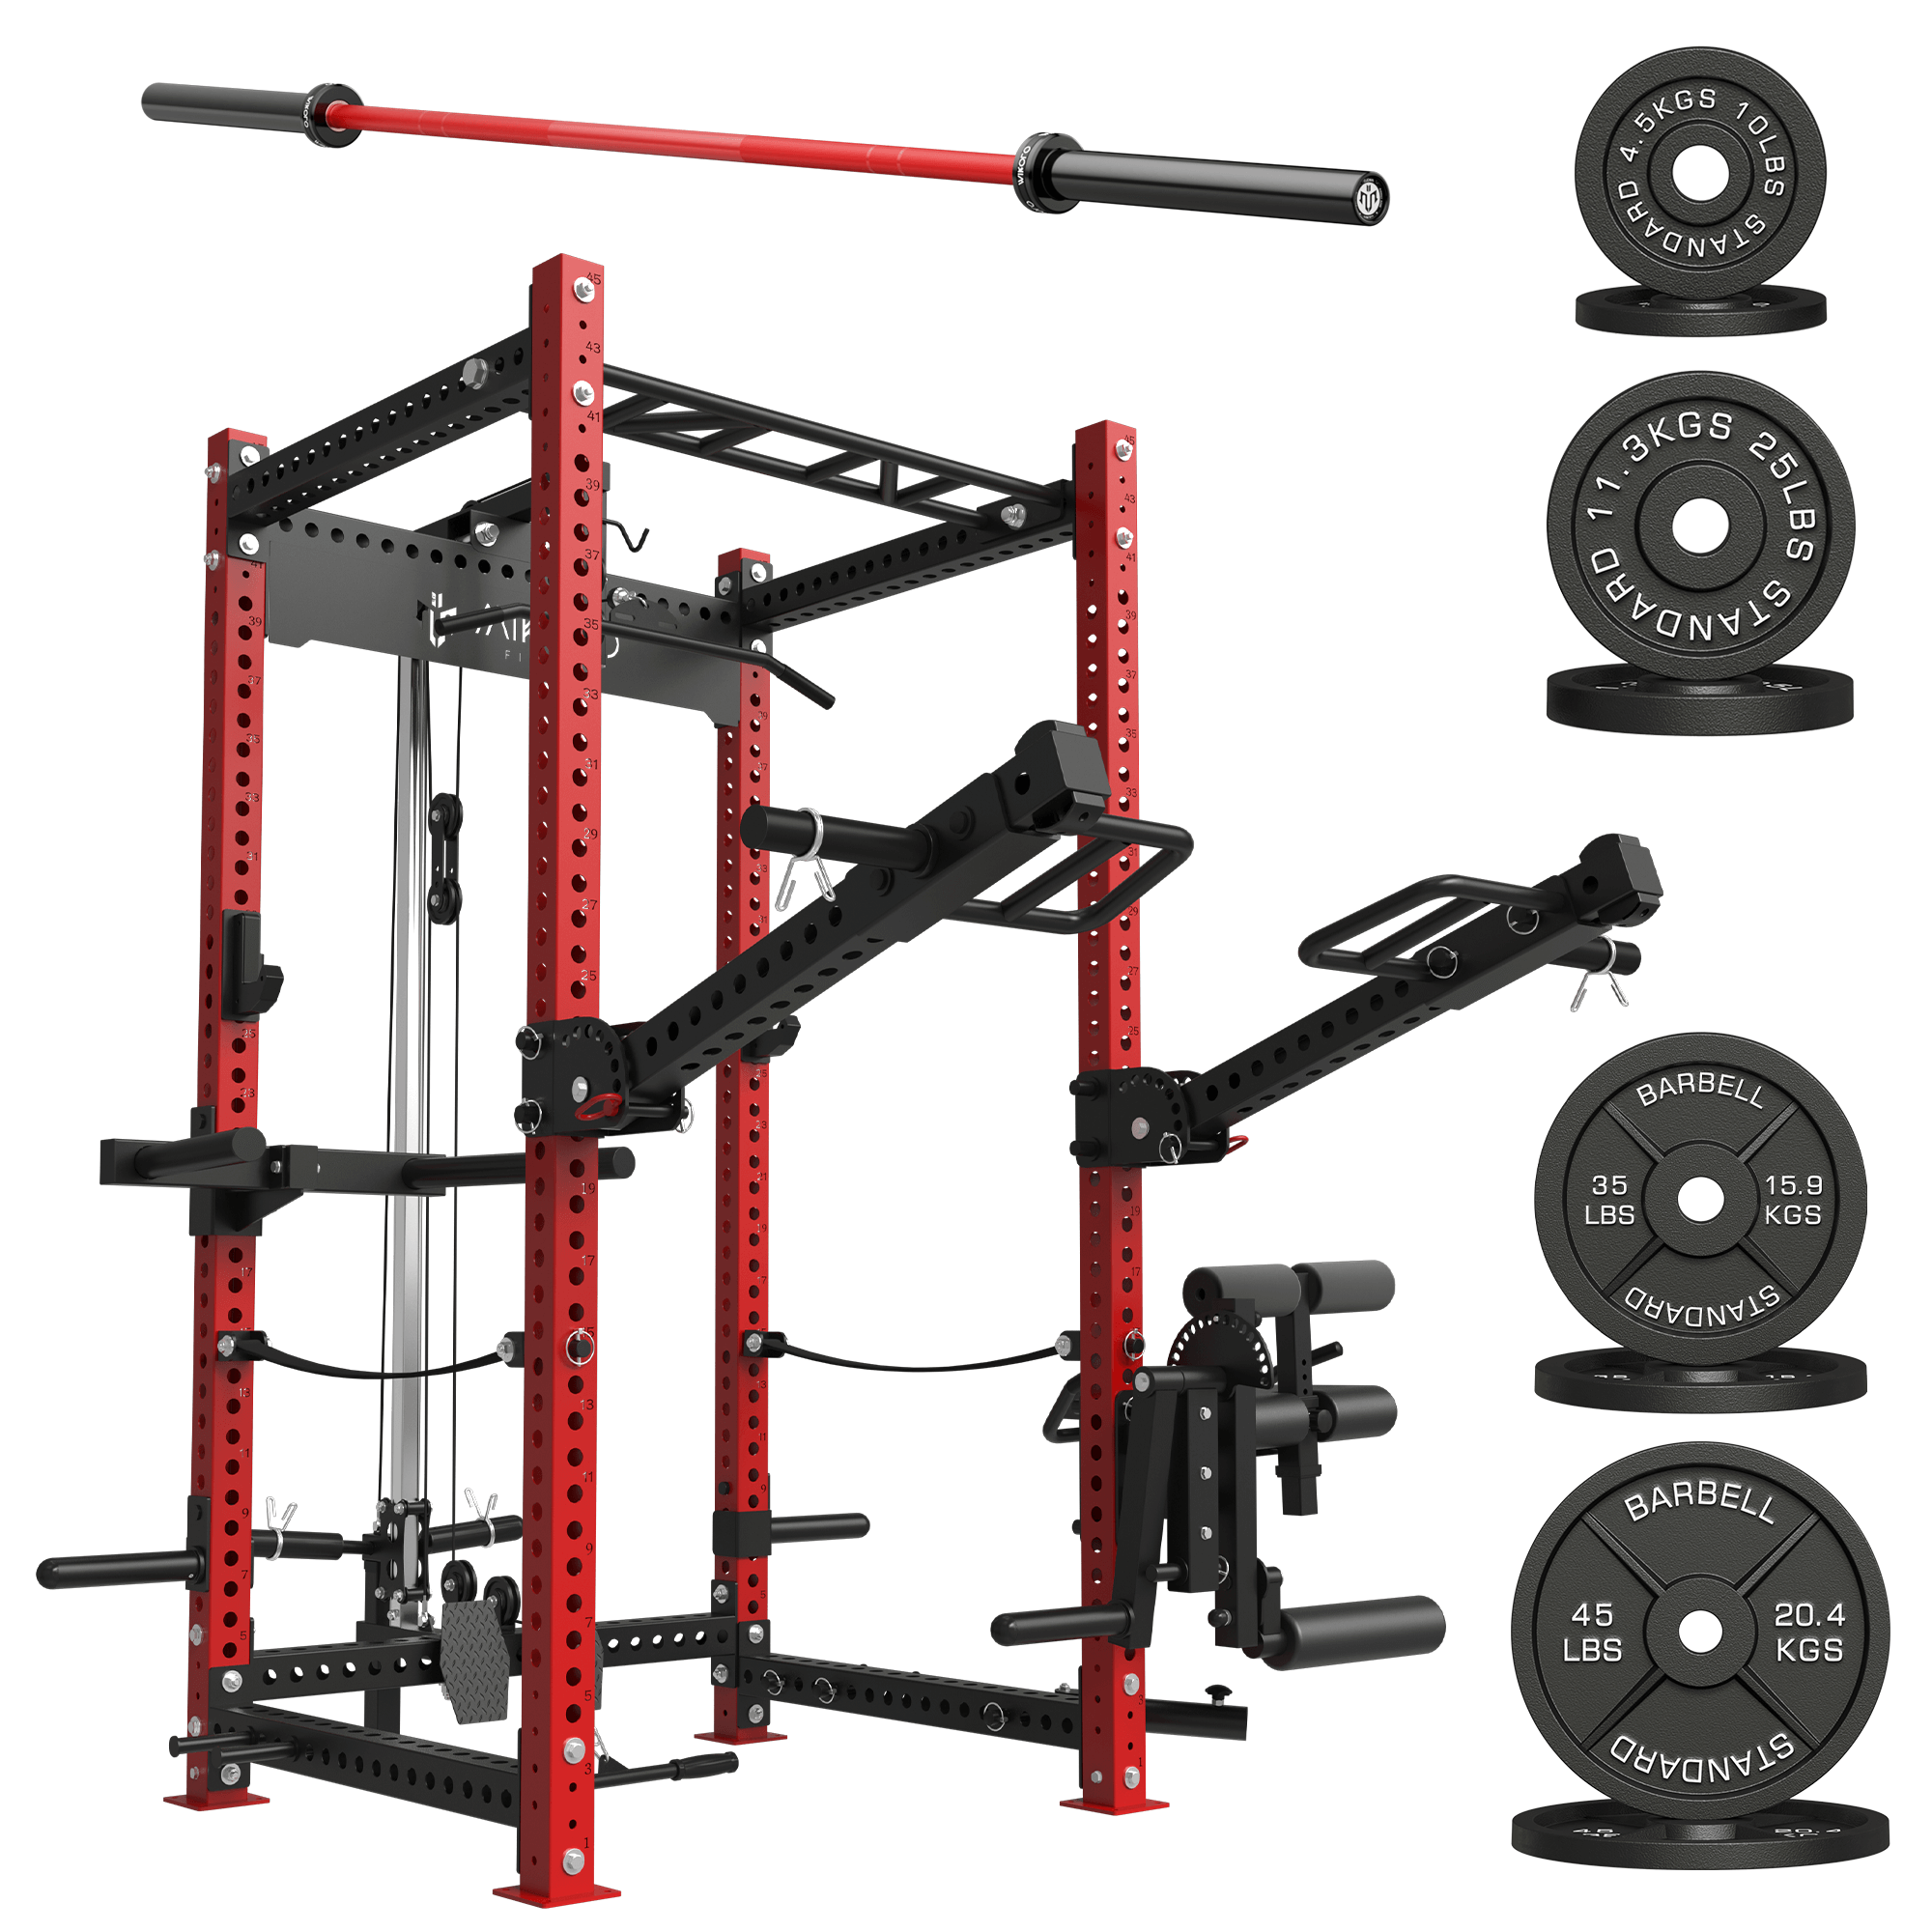 MIKOLO P5R Rack with Barbell and Weights Set